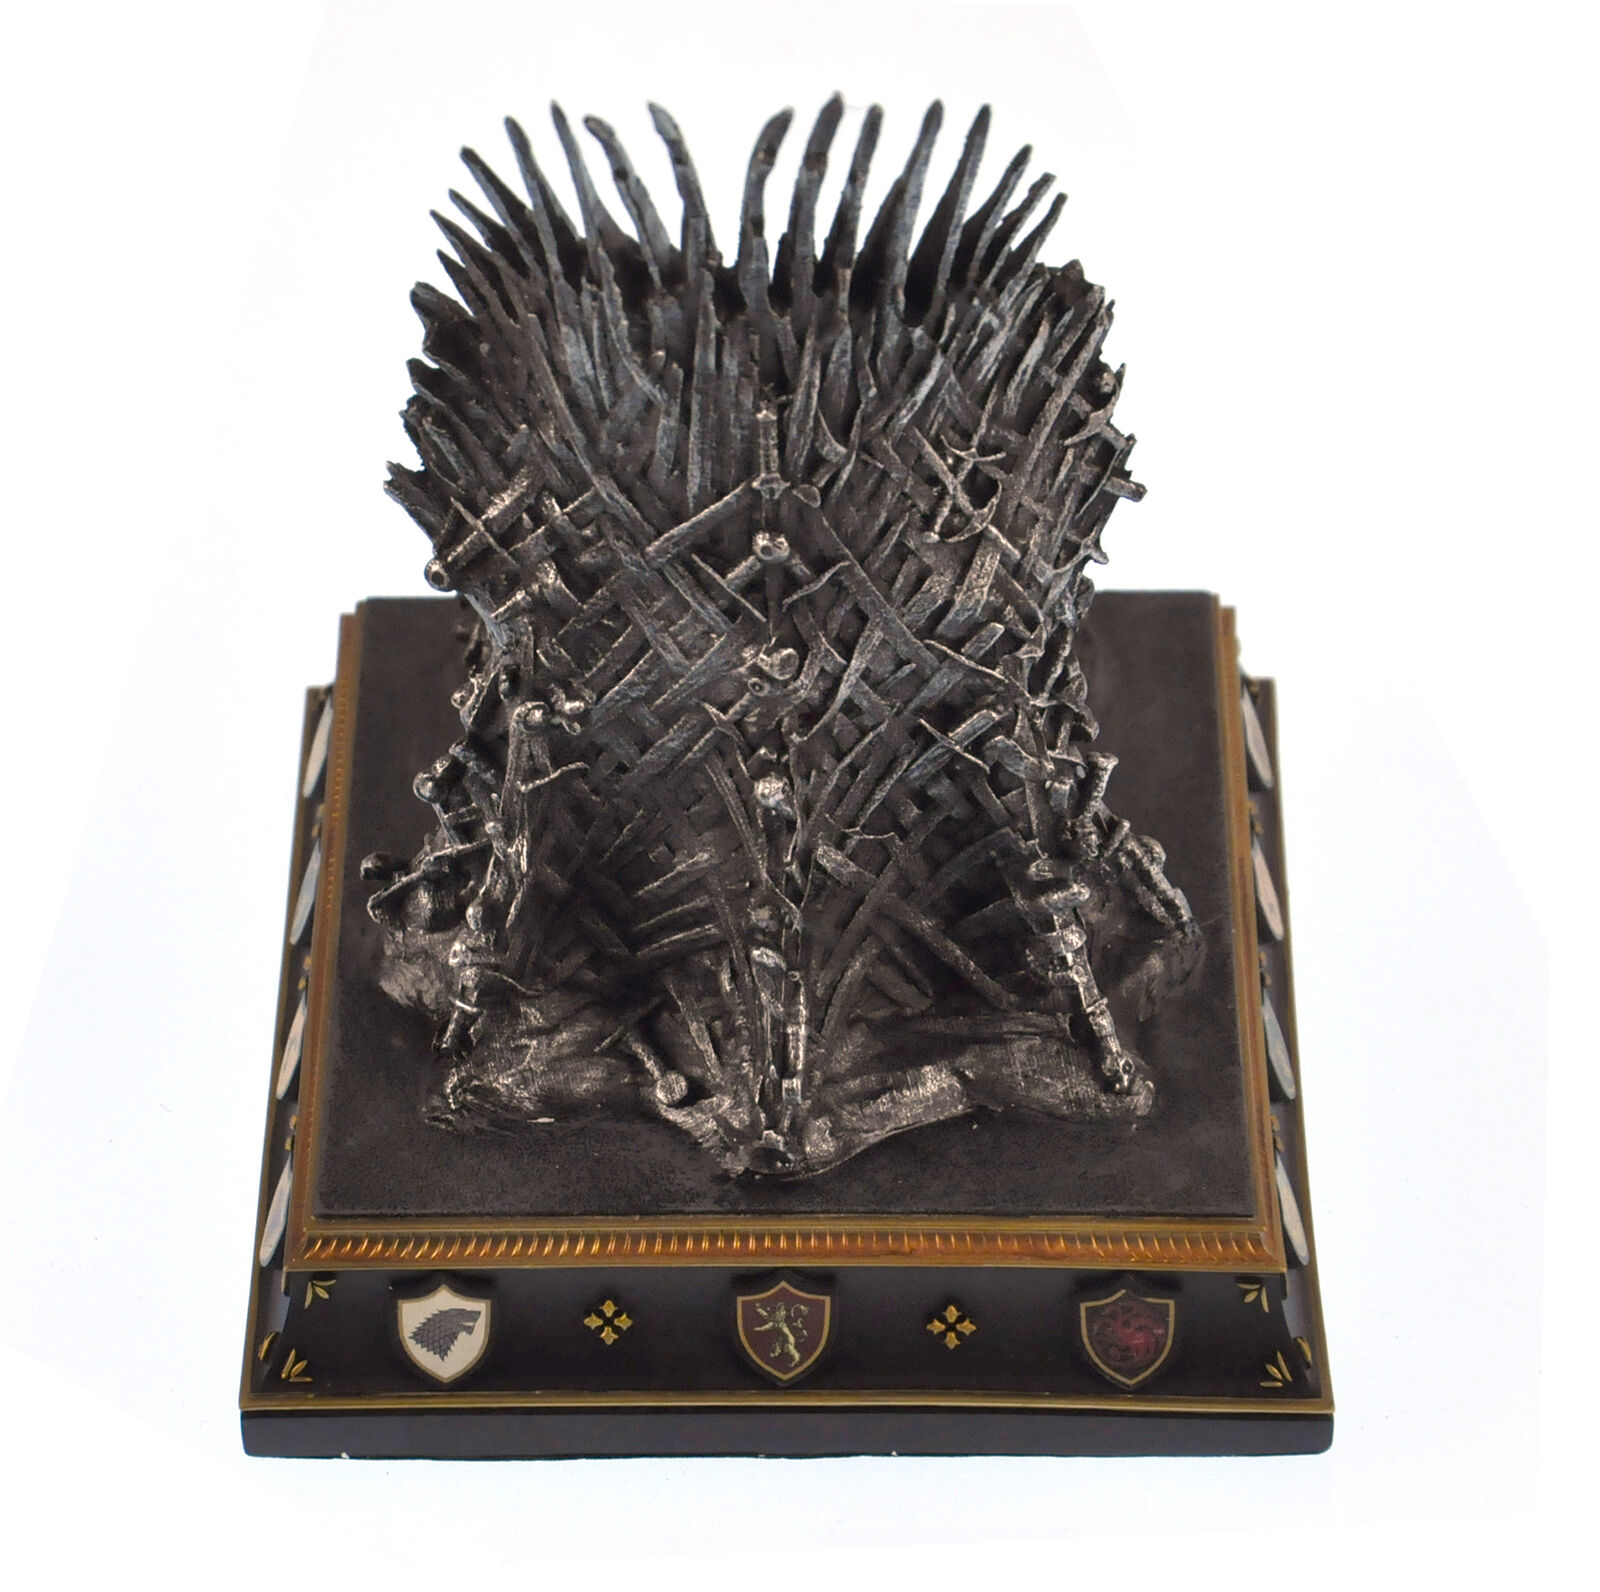 The Iron Throne - The Game of Thrones Replica 3